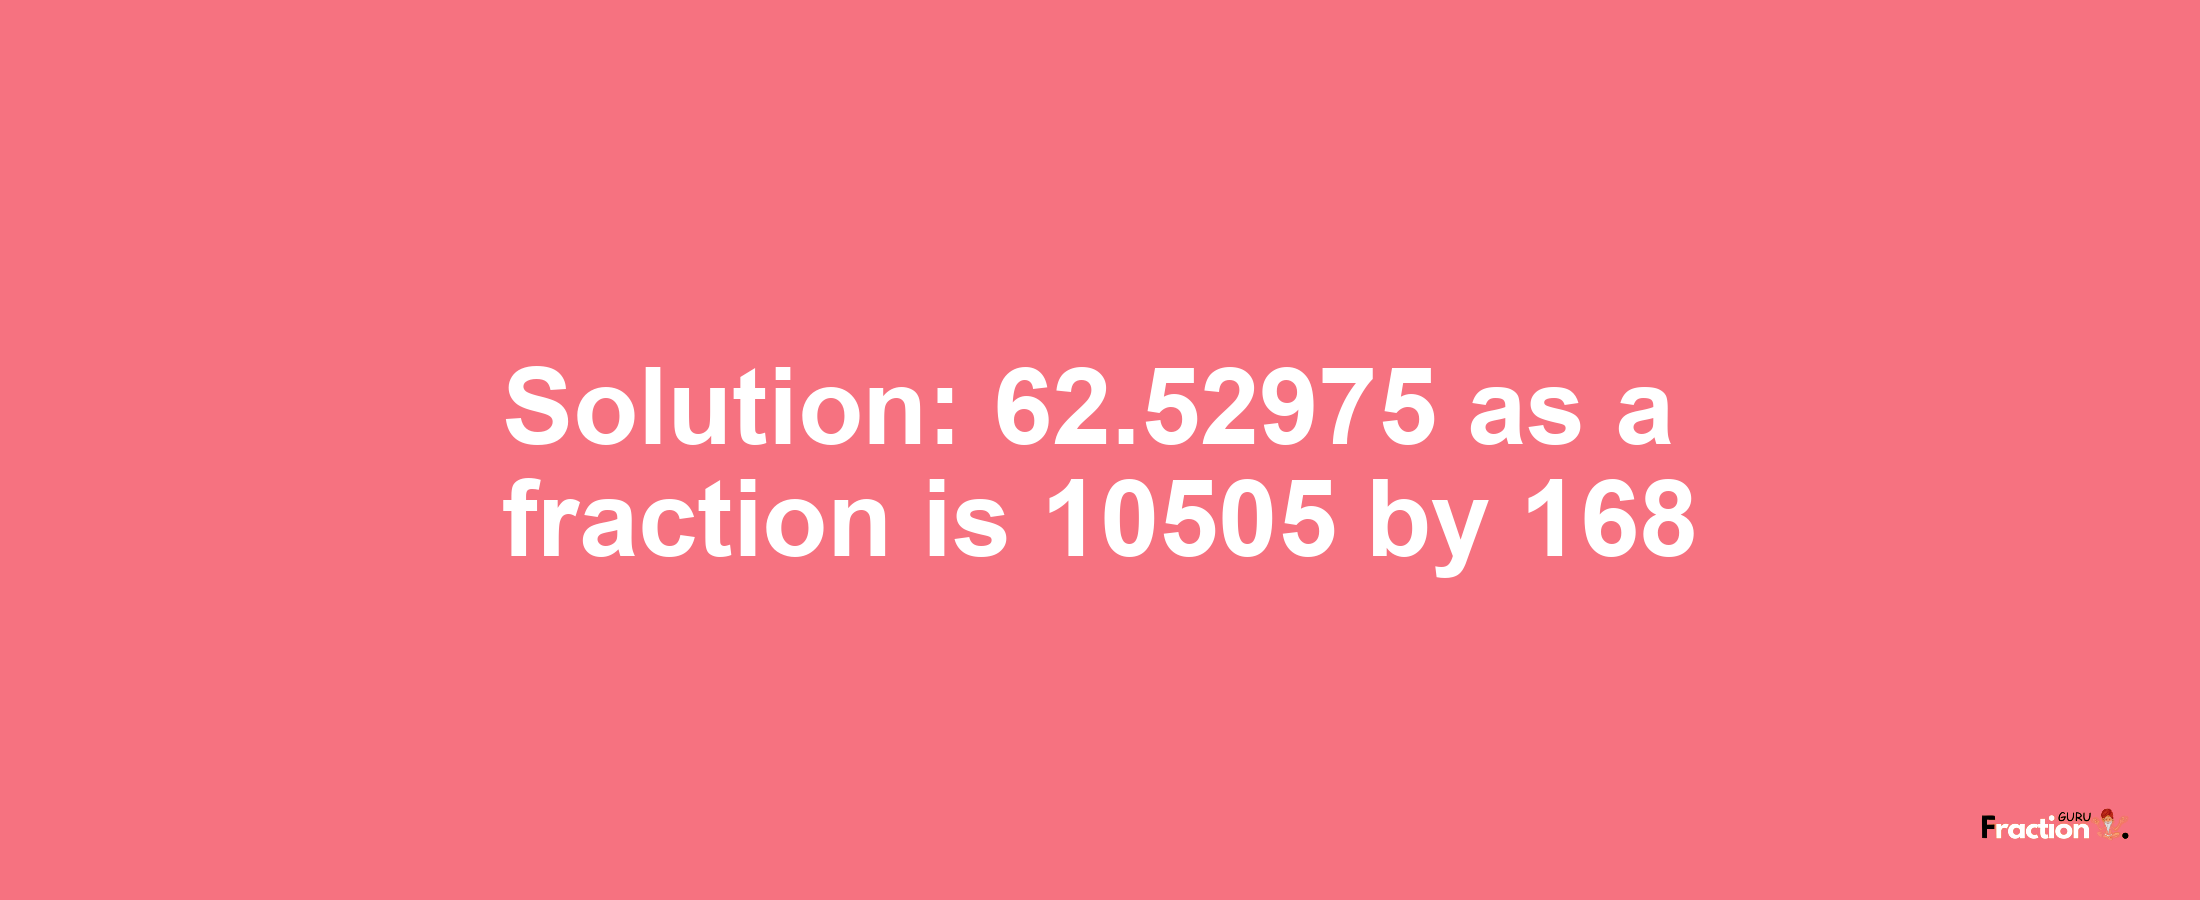 Solution:62.52975 as a fraction is 10505/168